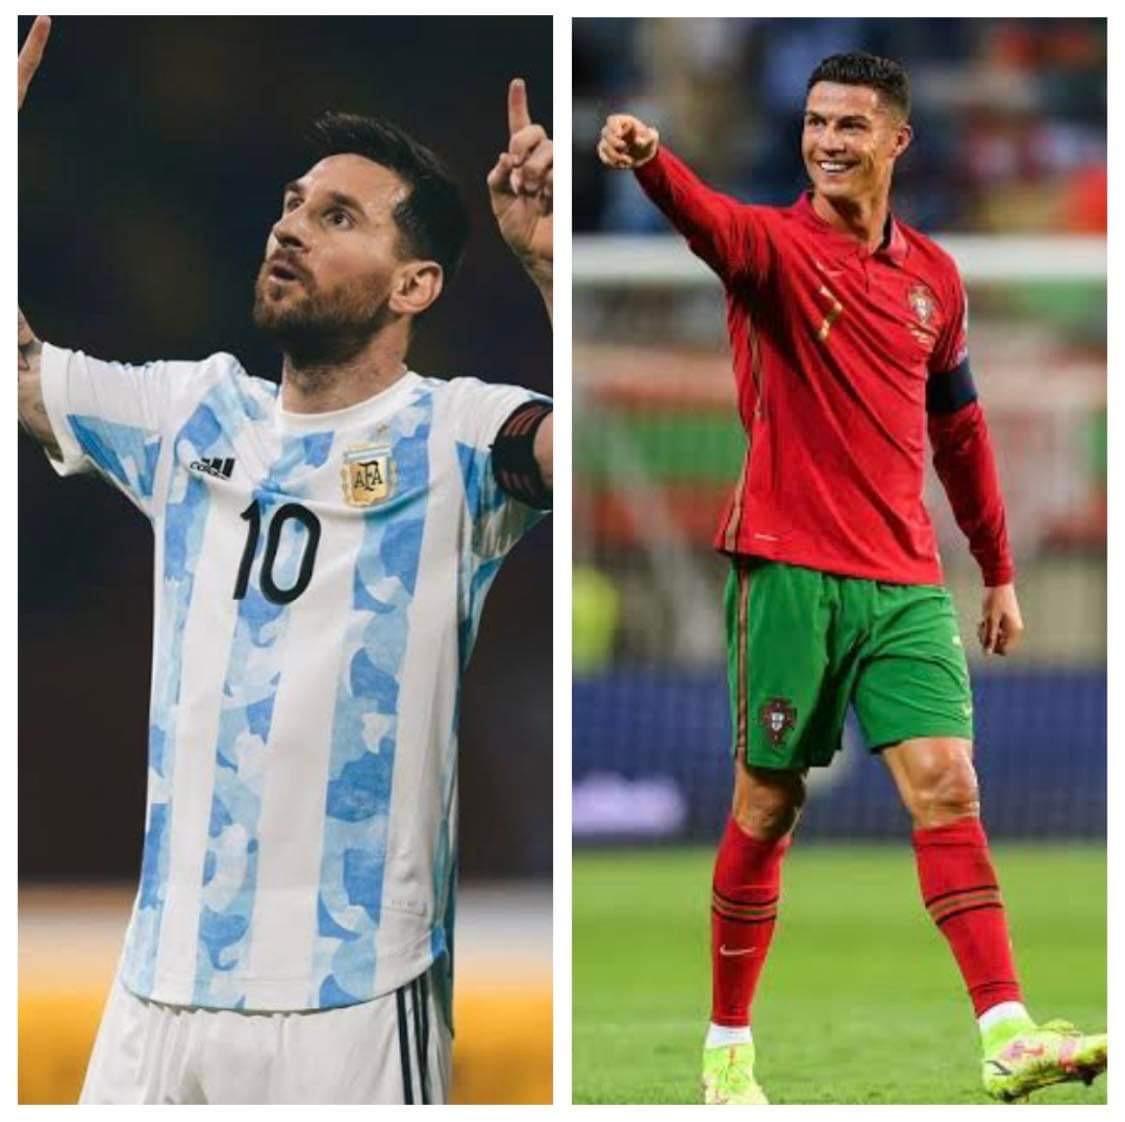 Best Forwards to Target in World Cup Fantasy ~ Messi and Ronaldo